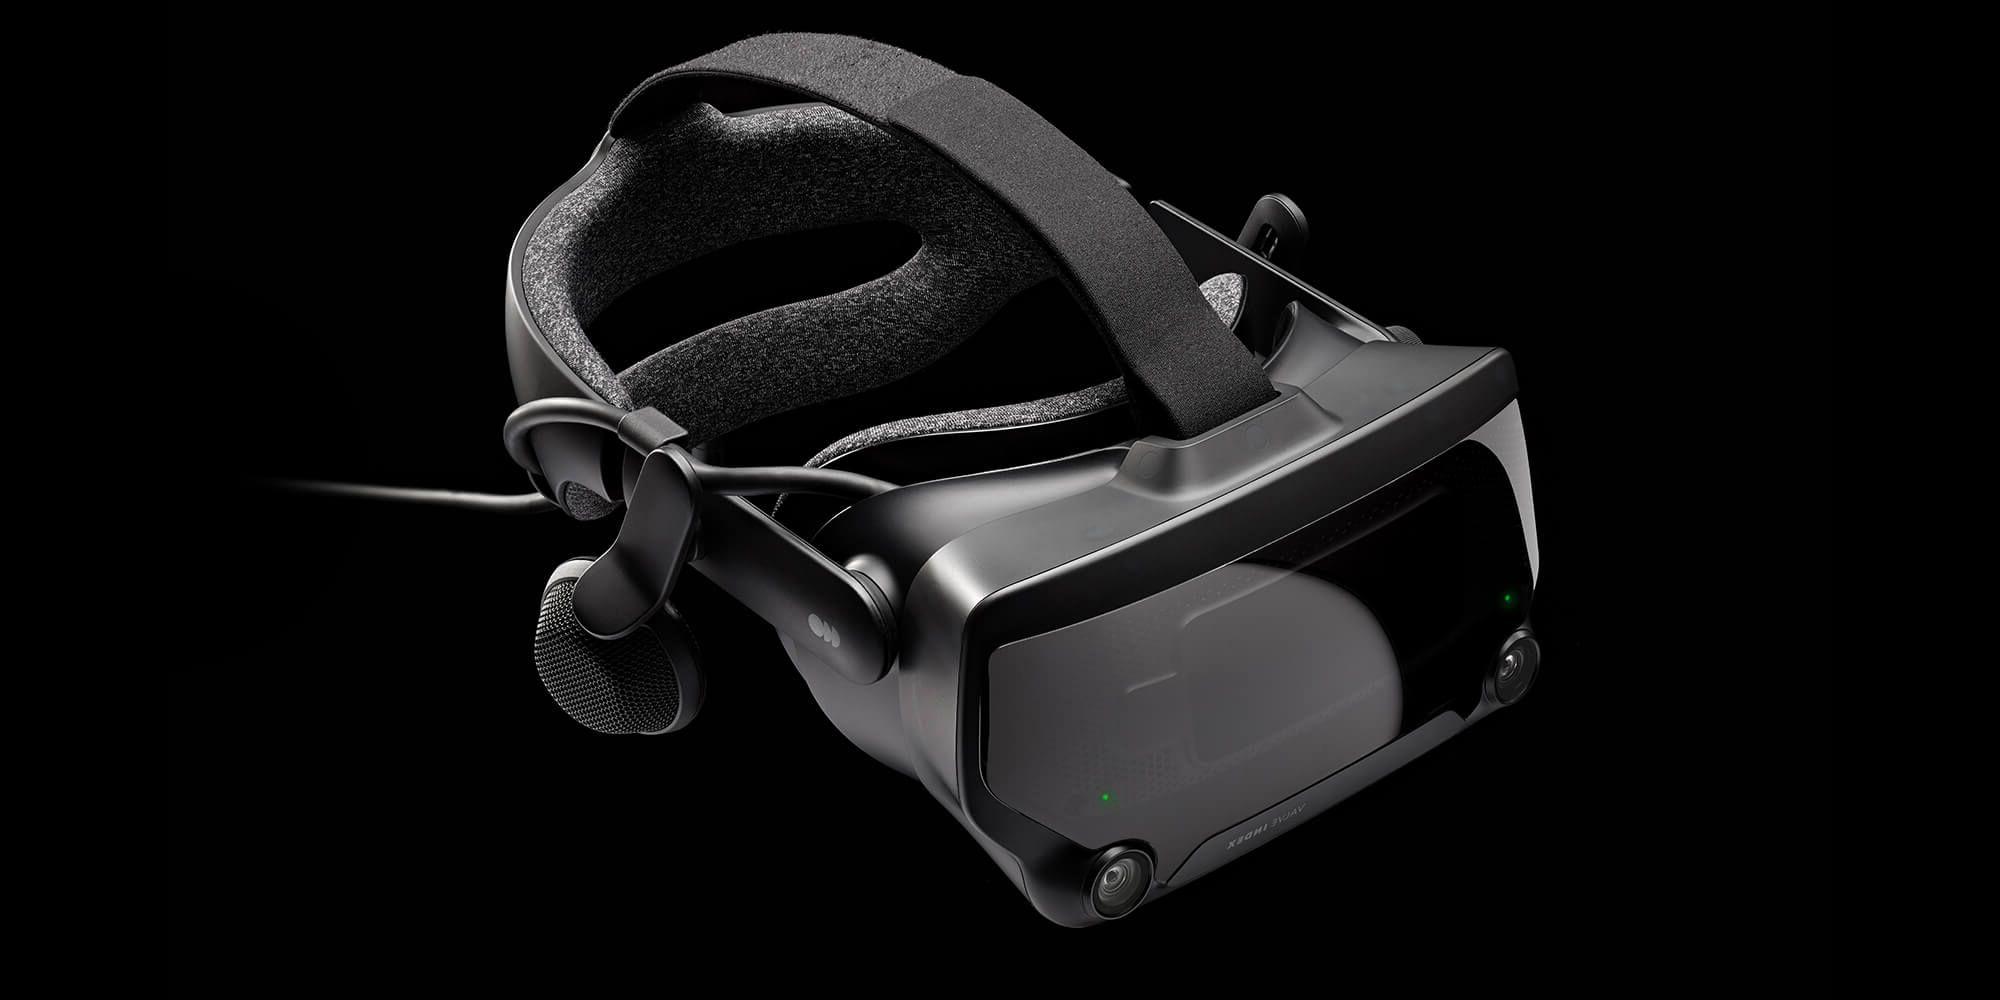 Valve Could Be Working on a VR Headset According to a Patent